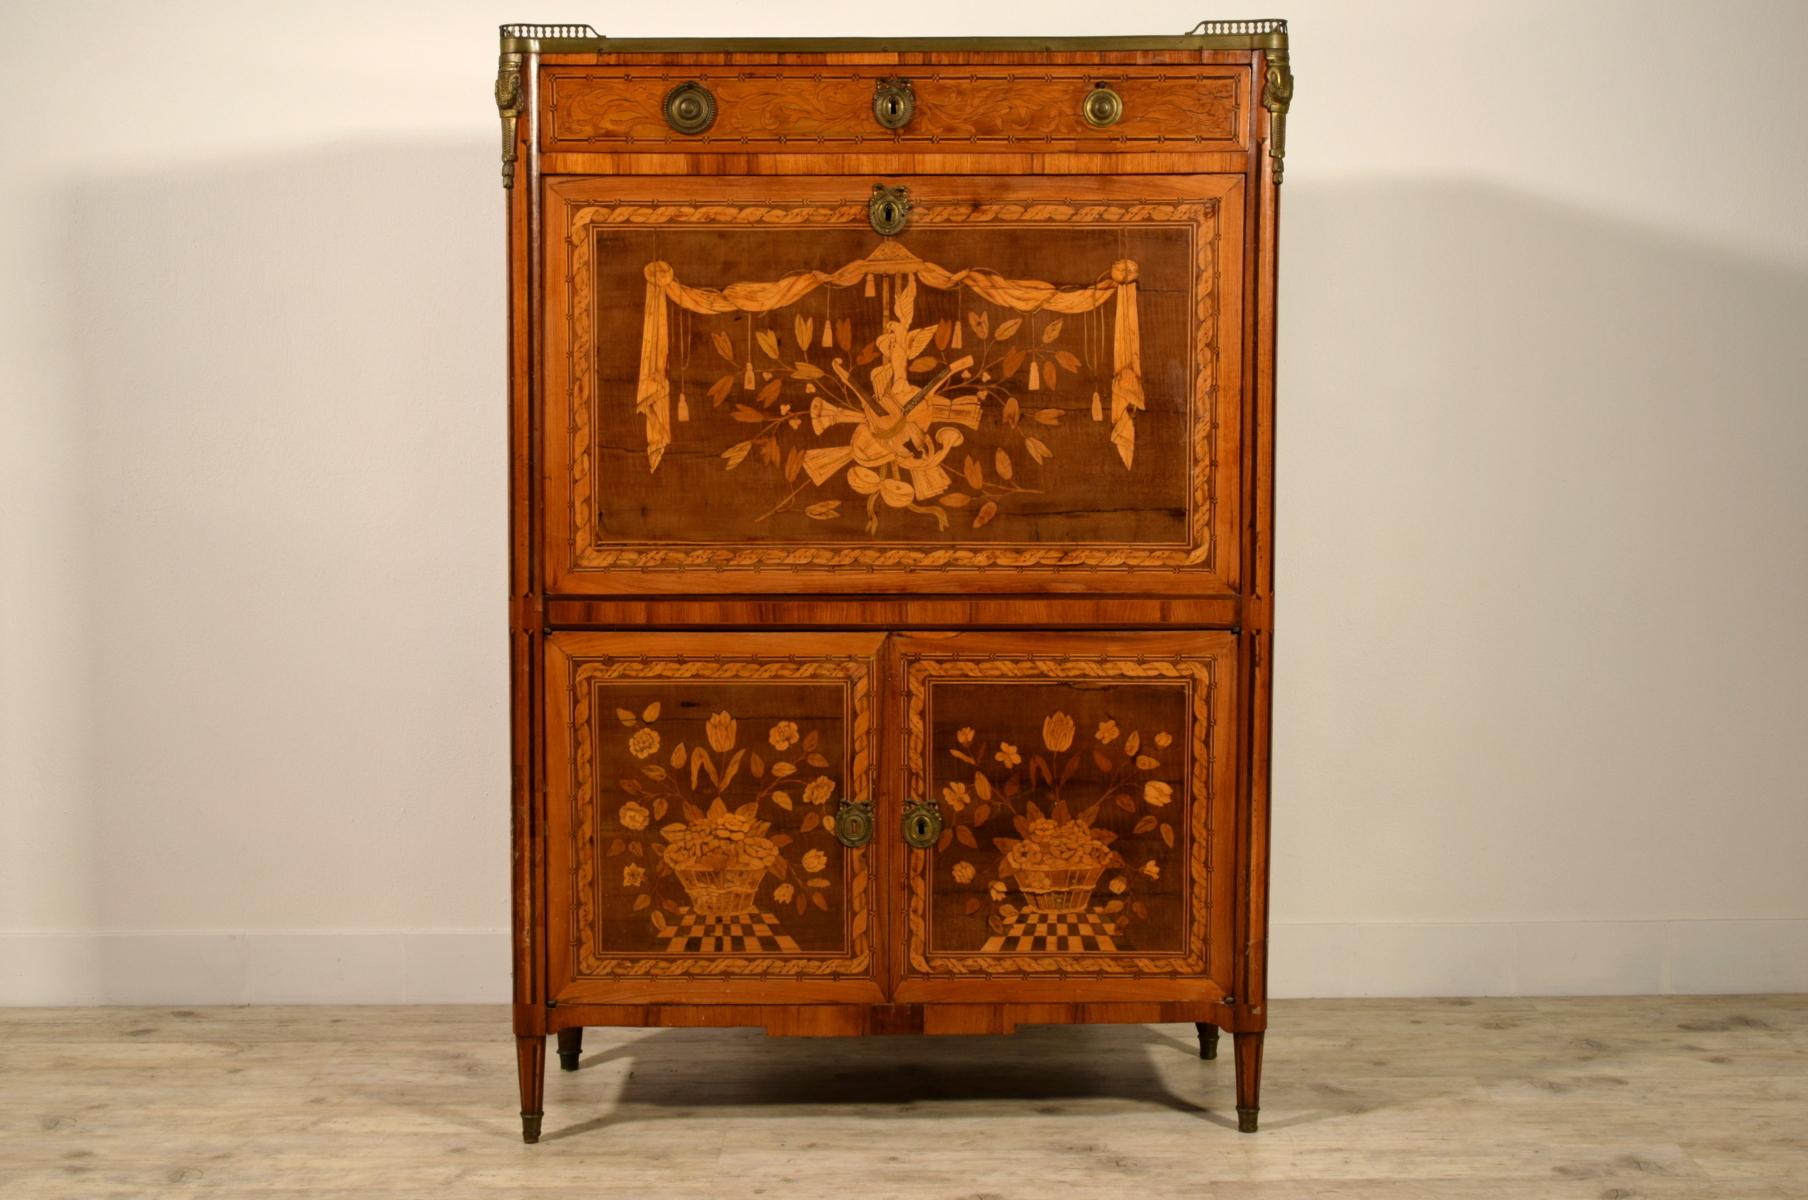 18th century, French Louis XVI inlaid wood secretaire with marble top and gilt bronzes.

This elegant secretaire Louis XVI was made in France in the second half of the 18th century.
The cabinet is finely inlaid with wooden essences of different